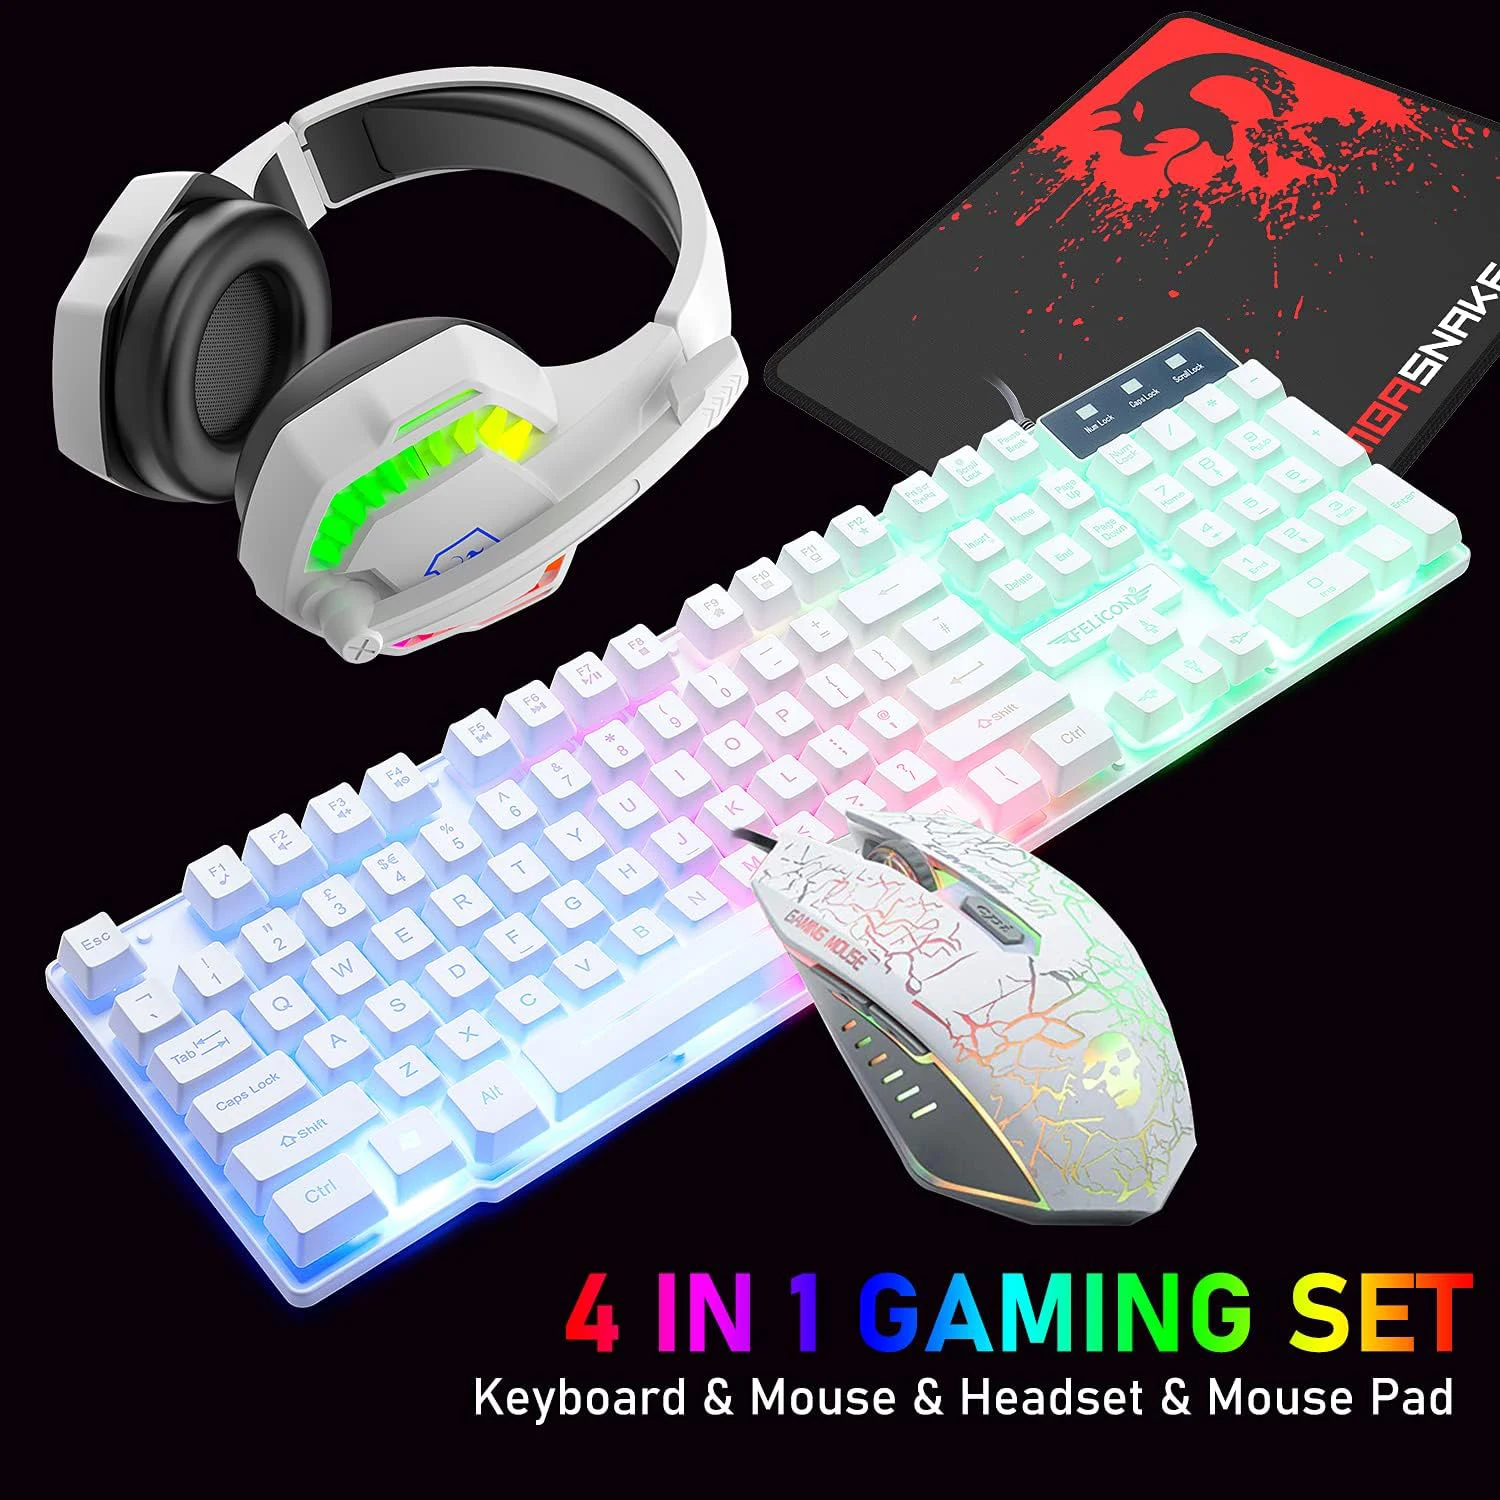 Wired Gaming Keyboard and Mouse Headset Combo,Rainbow LED Backlit Wired  Keyboard,Over Ear Headphone with Mic,Rainbow Backlit Gaming Mice,Mouse Pad,for  PC,Laptop,Mac,PS4,Xbox(Black) 